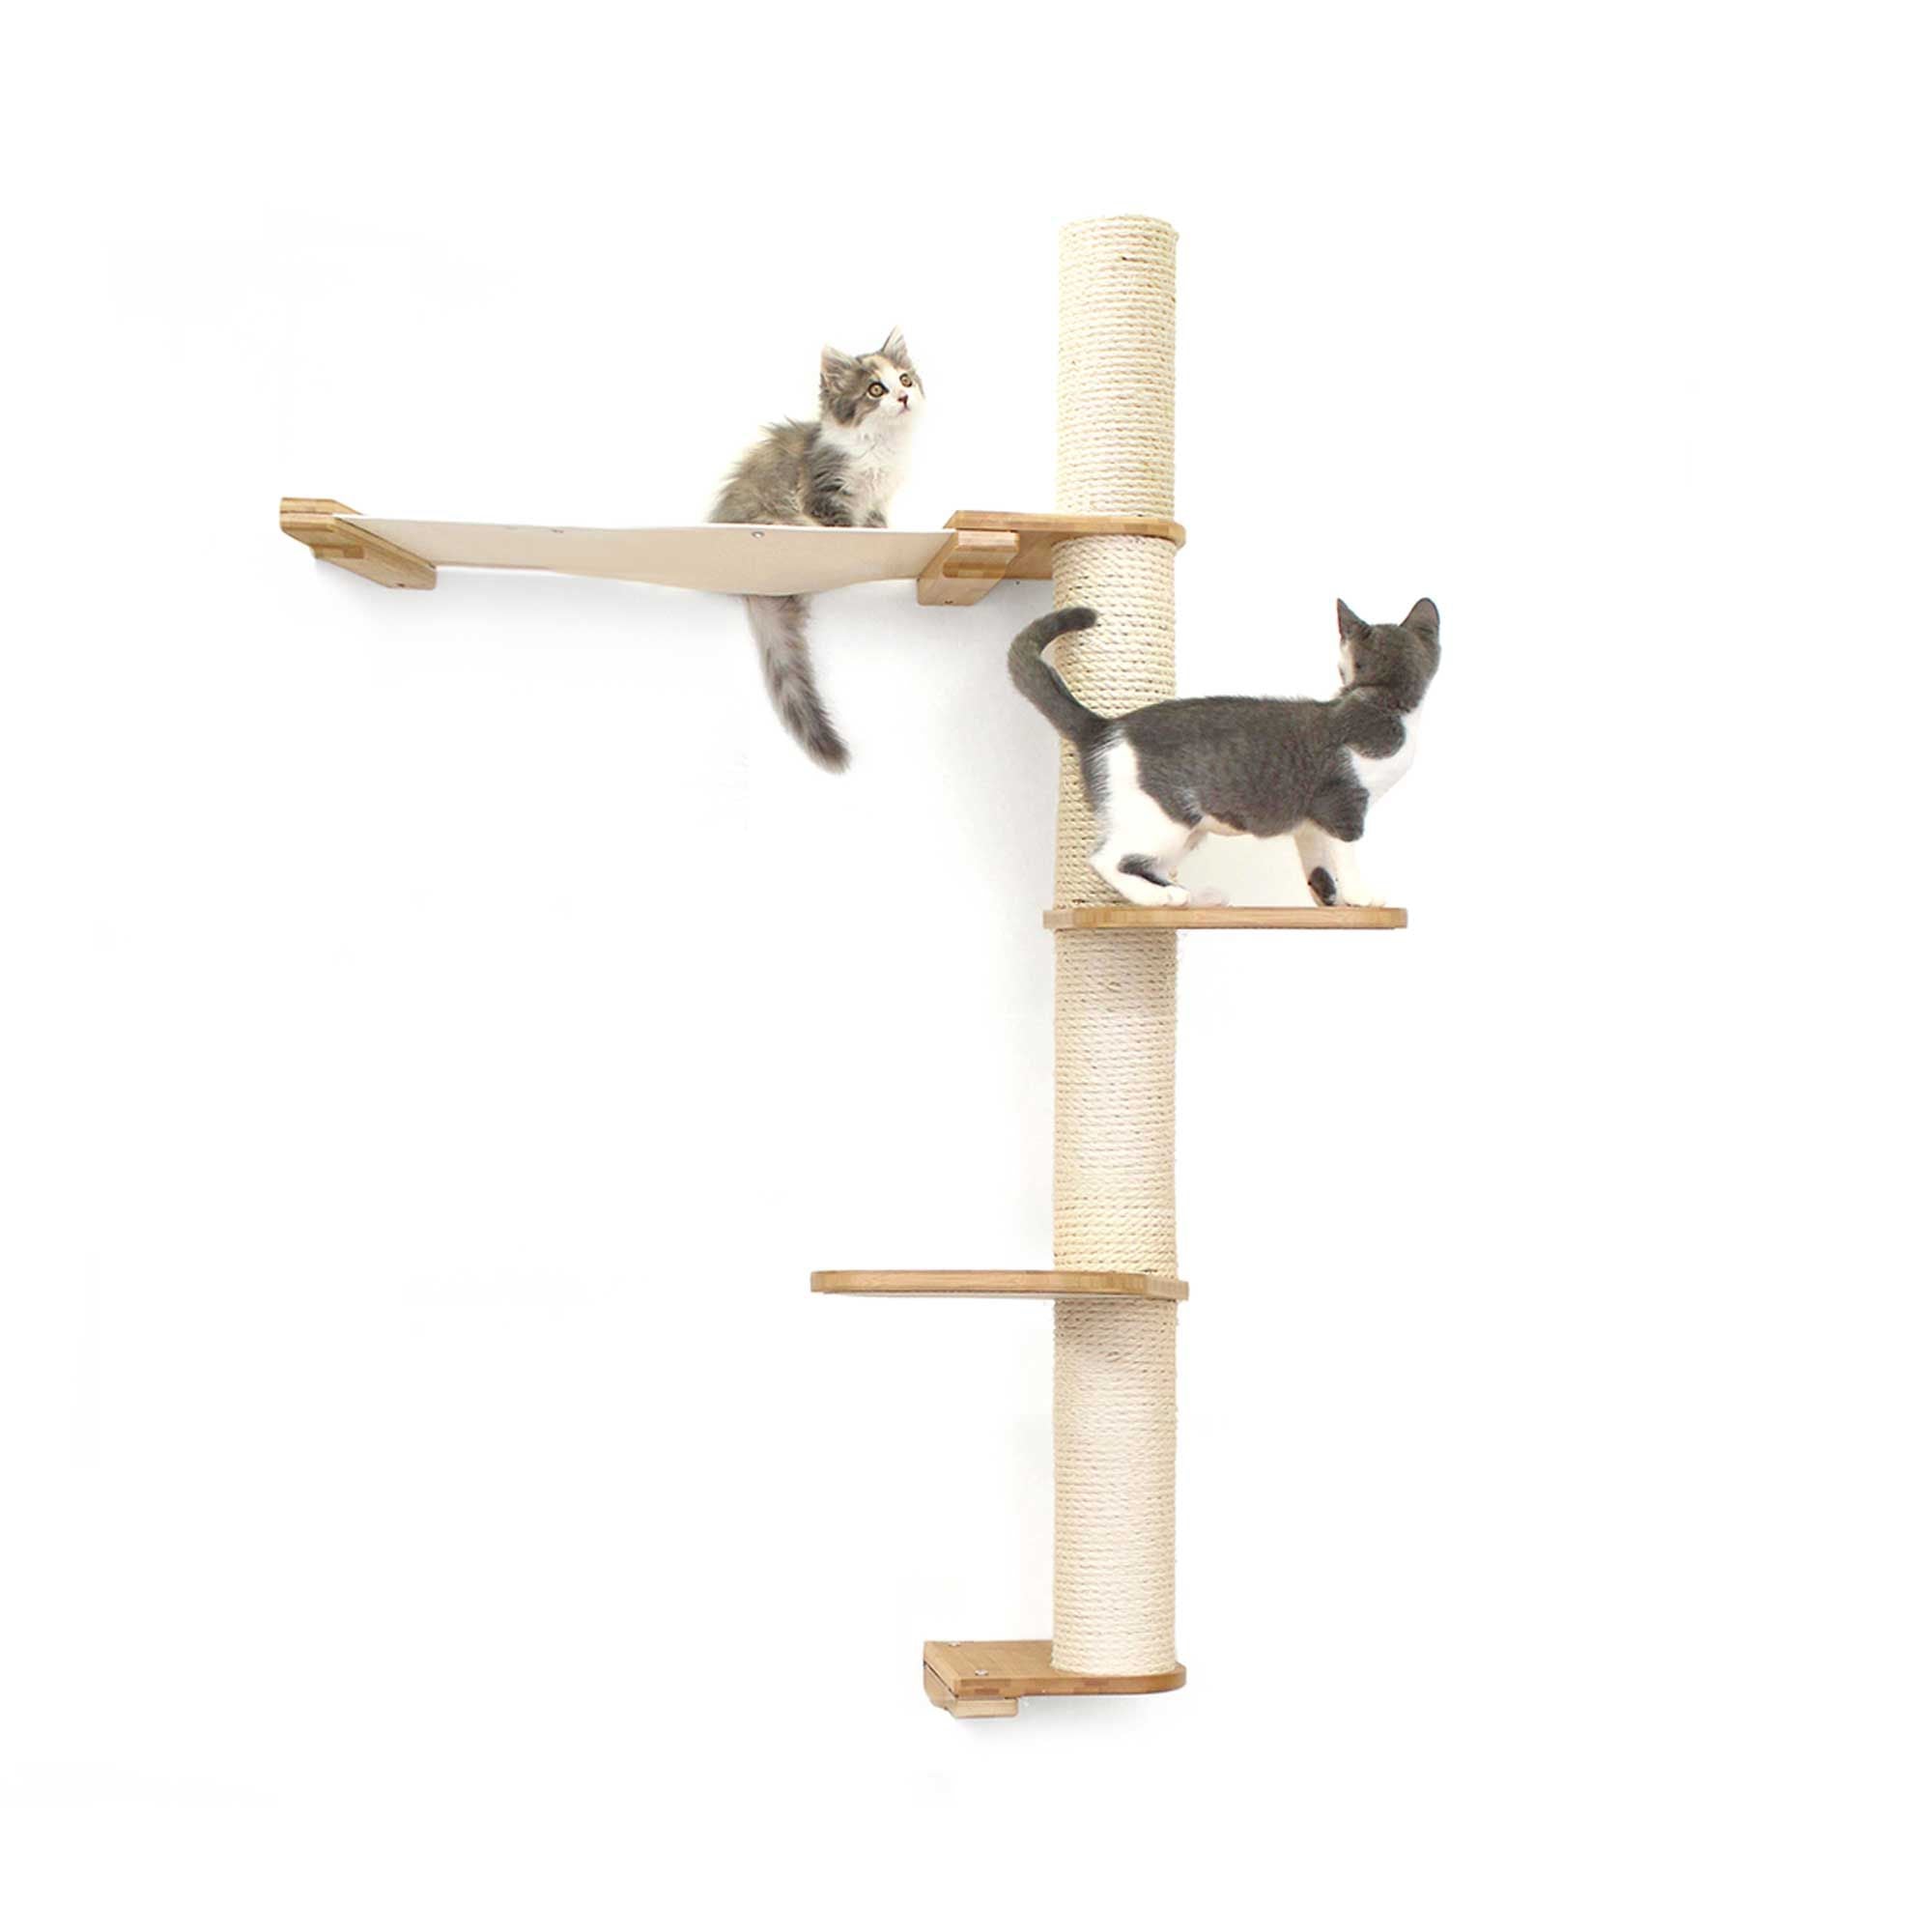 The Crow's Nest: High, Tall Cat Tree/Hammock by Catastrophic Creations